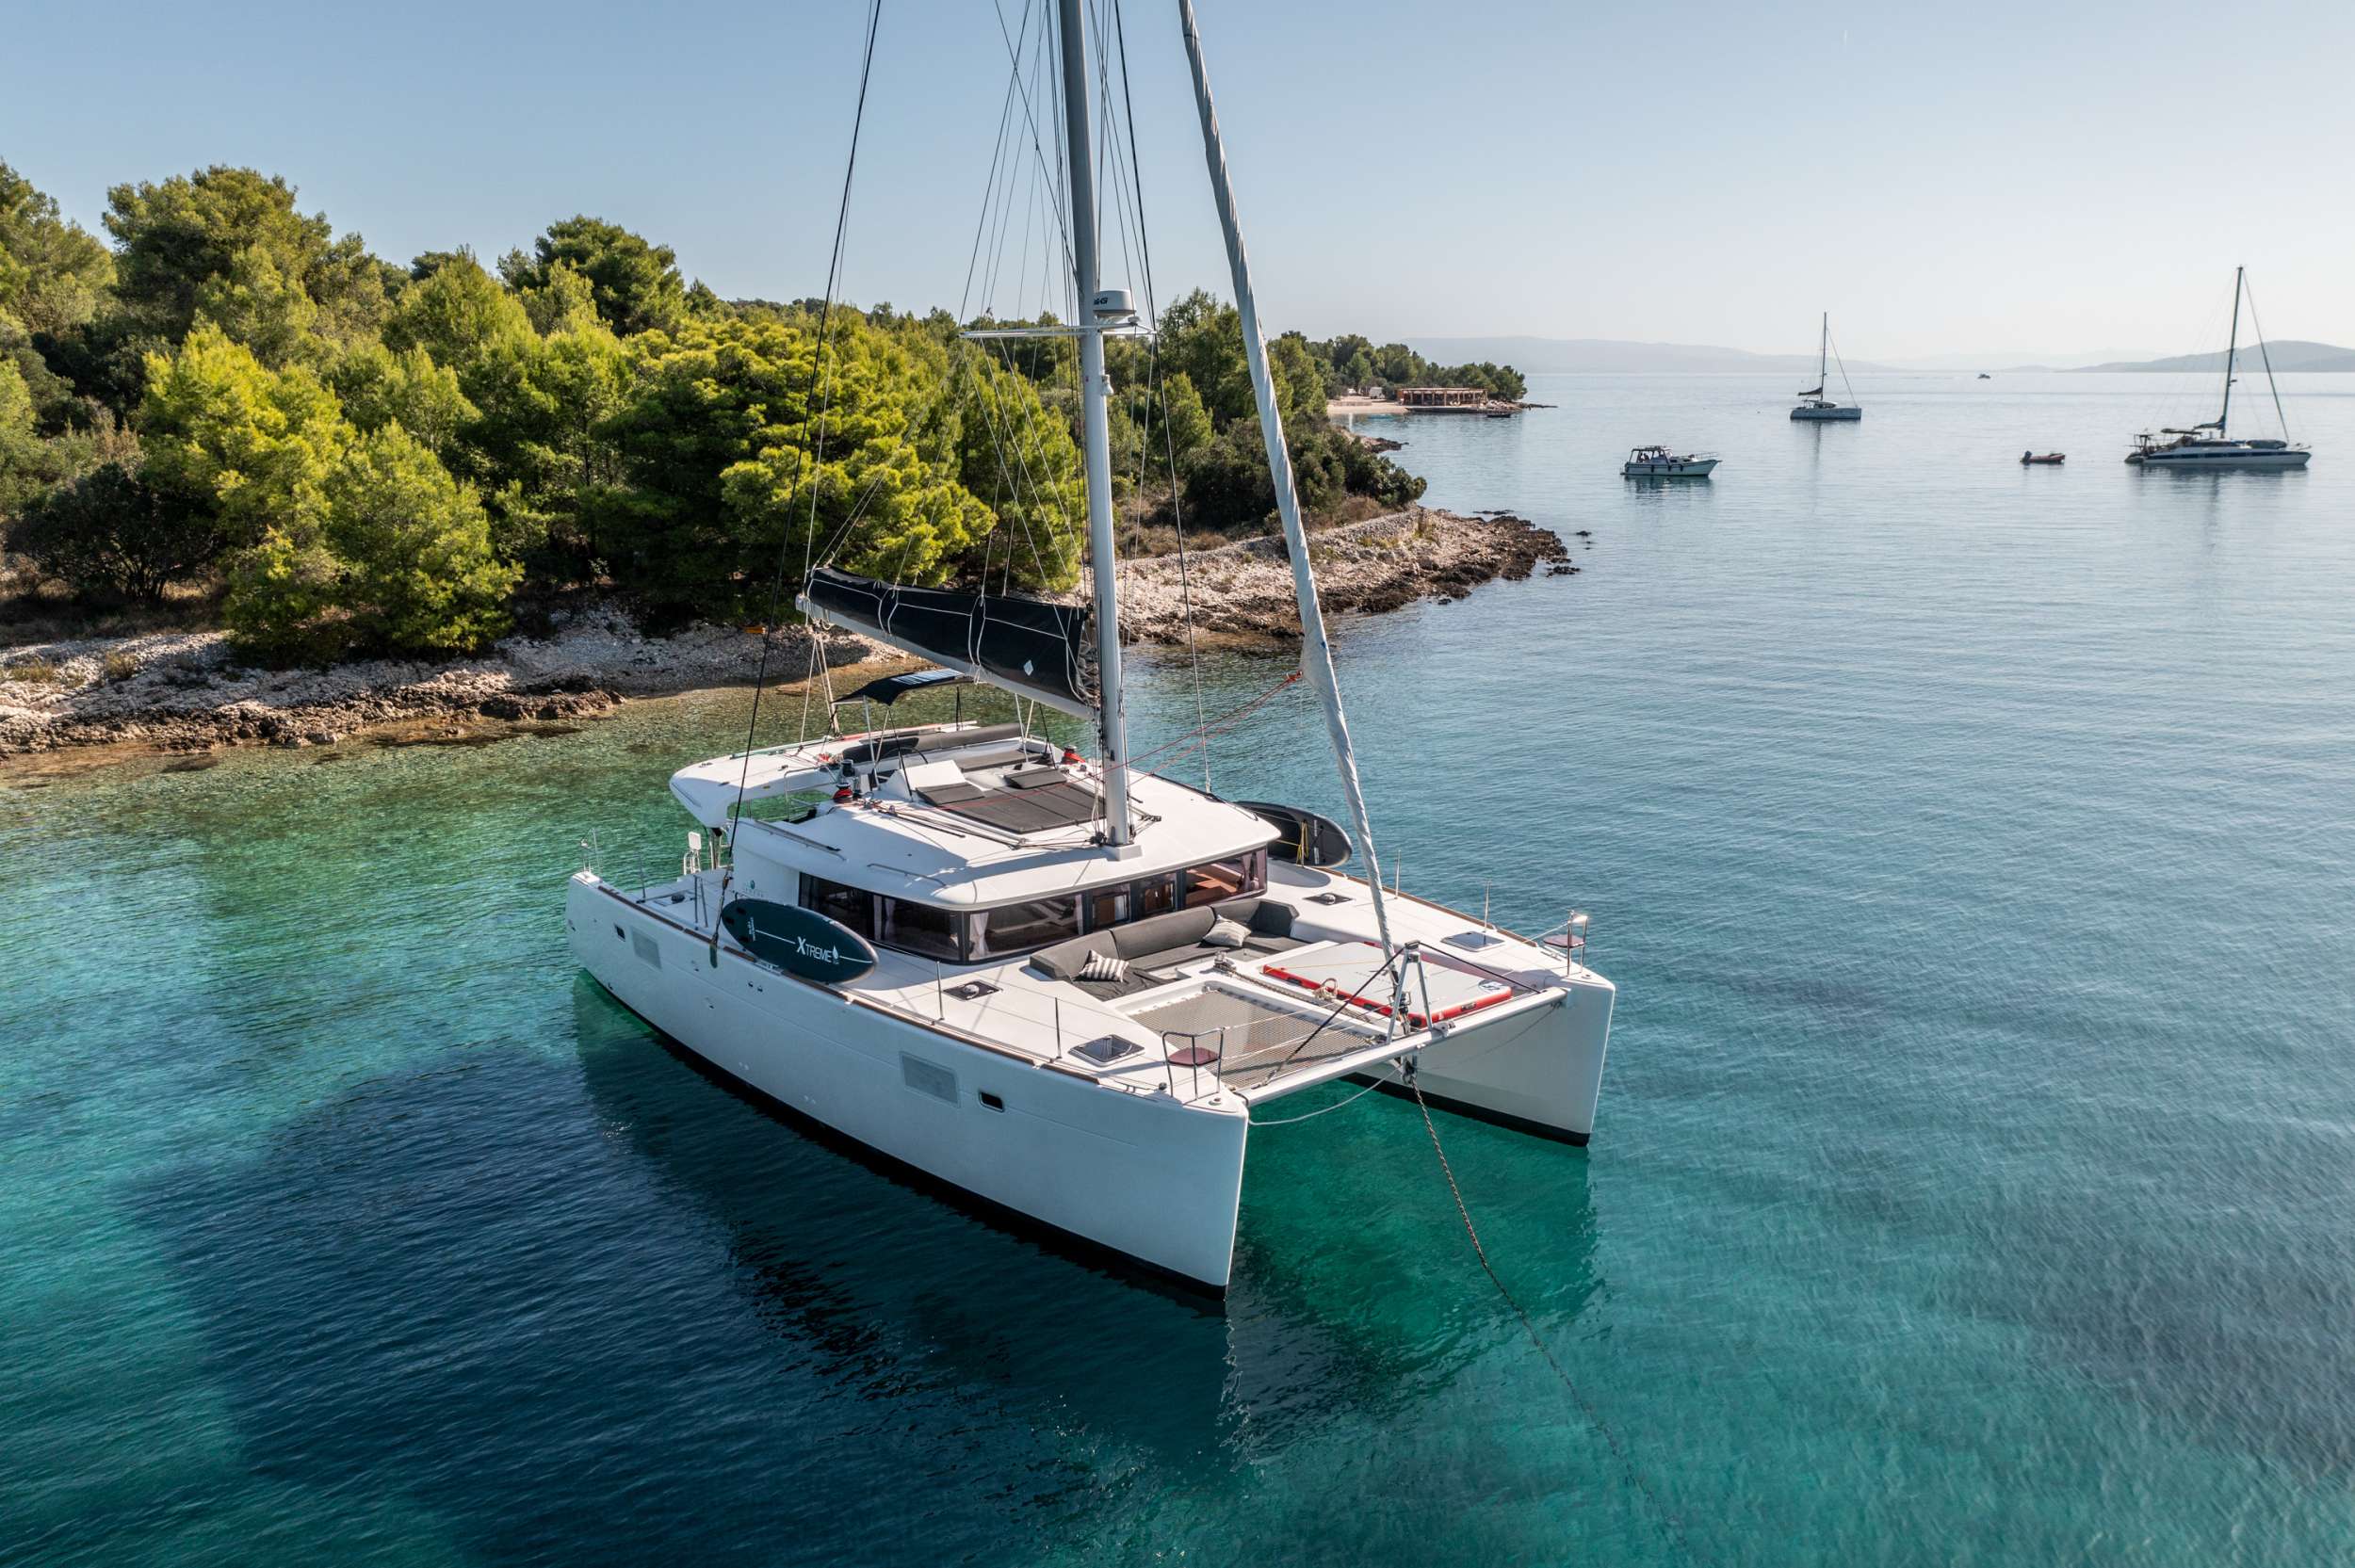 'Because you want more than a trip, you want an experience that stirs the heart; an experience that becomes you.'

Falco is a Lagoon 450F. Falco has recently been taken over by a new owner, Dare Nazor, who has significantly updated the boat for crewed charters. Falco is in pristine condition and would make a fantastic choice for a crewed yacht charter in Croatia. With three en suite cabins, the catamaran is Ideal for 6 guests. Experience the stunning towns and vistas of Croatia with your very own guide and Captain, Dare. Experienced, welcoming and genuine, Dare will ensure that all guests have a charter of a lifetime.

FALCO is a fantastic addition to our yacht charter fleet and we are thrilled to be working with Captain Dare. As much as FALCO is an exceptional catamaran, kept in brilliant condition with plenty of space for a group of 6, the real stand out is Captain Dare. His genuine kindness and love of chartering is so apparent. 

An experienced Captain, Dare had a fantastic charter record on his previous gulet Altair. He is excited to start his newest venture with Falco, working alongside his long time friend Jozo. The pair have previously worked together very successfuly and cannot wait to get started in 2024.
